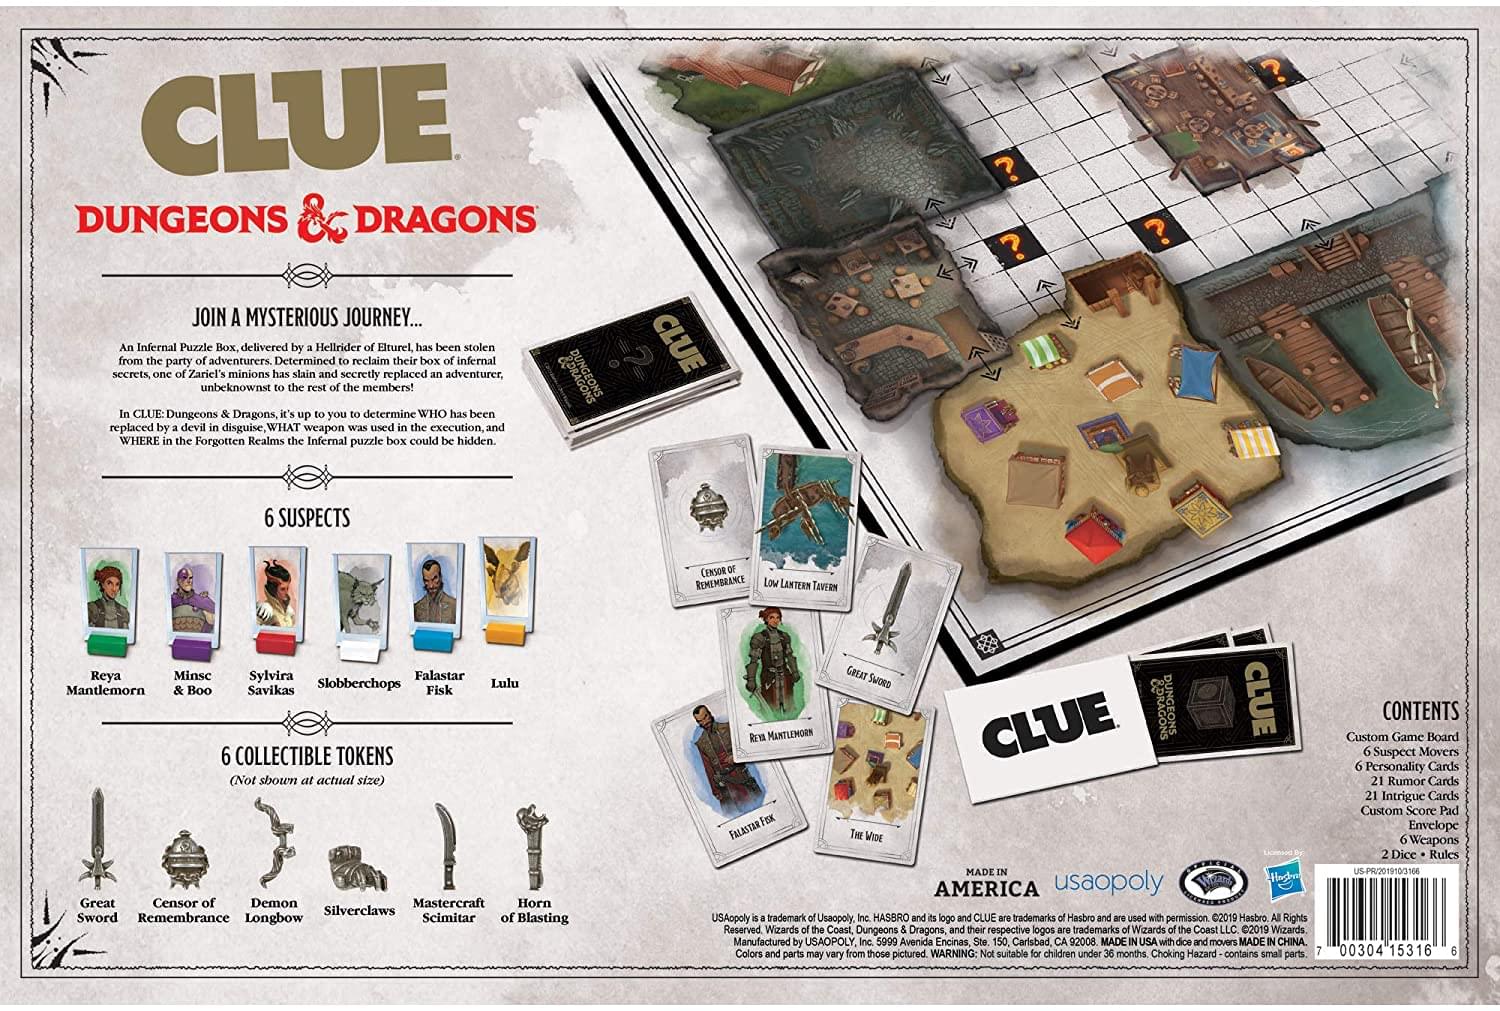 Dungeons & Dragons Clue Board Game | For 3-6 Players